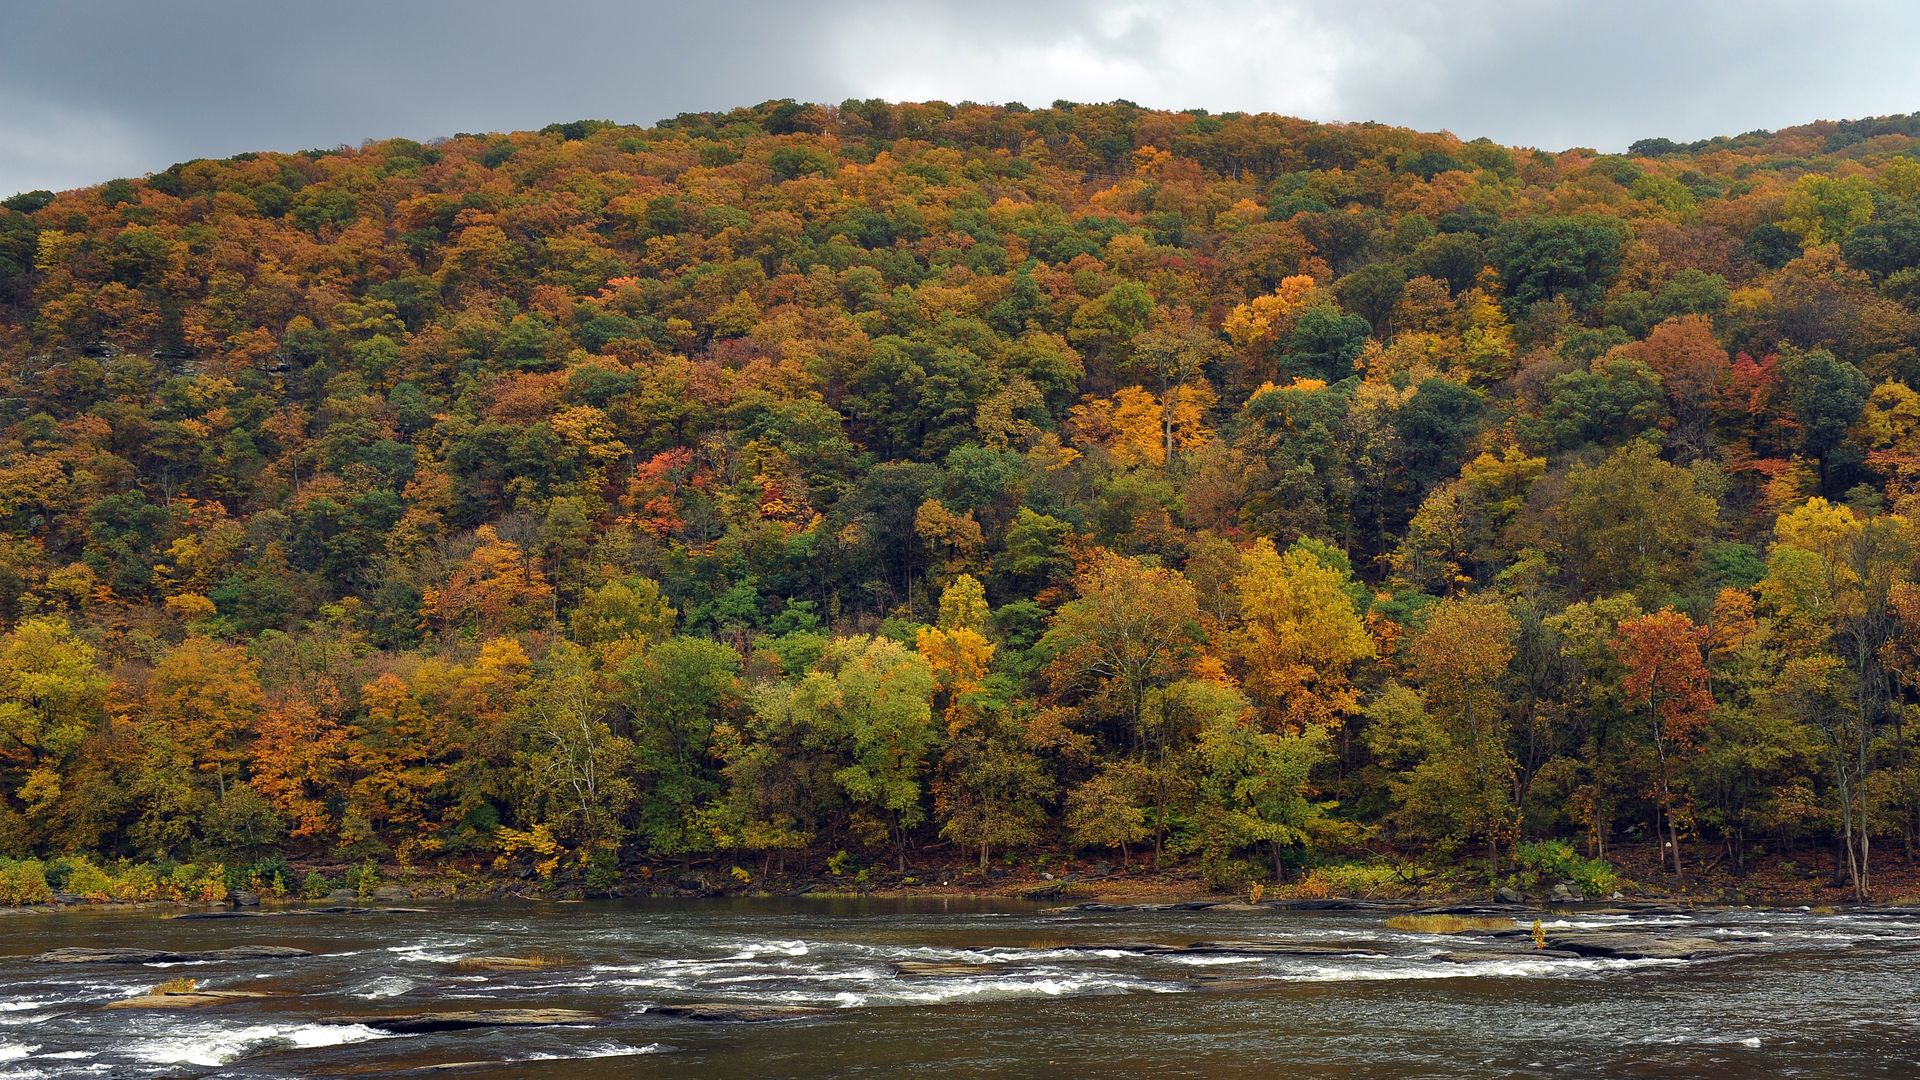 Fall foliage on a West Virginia mountain in front of a body of water.